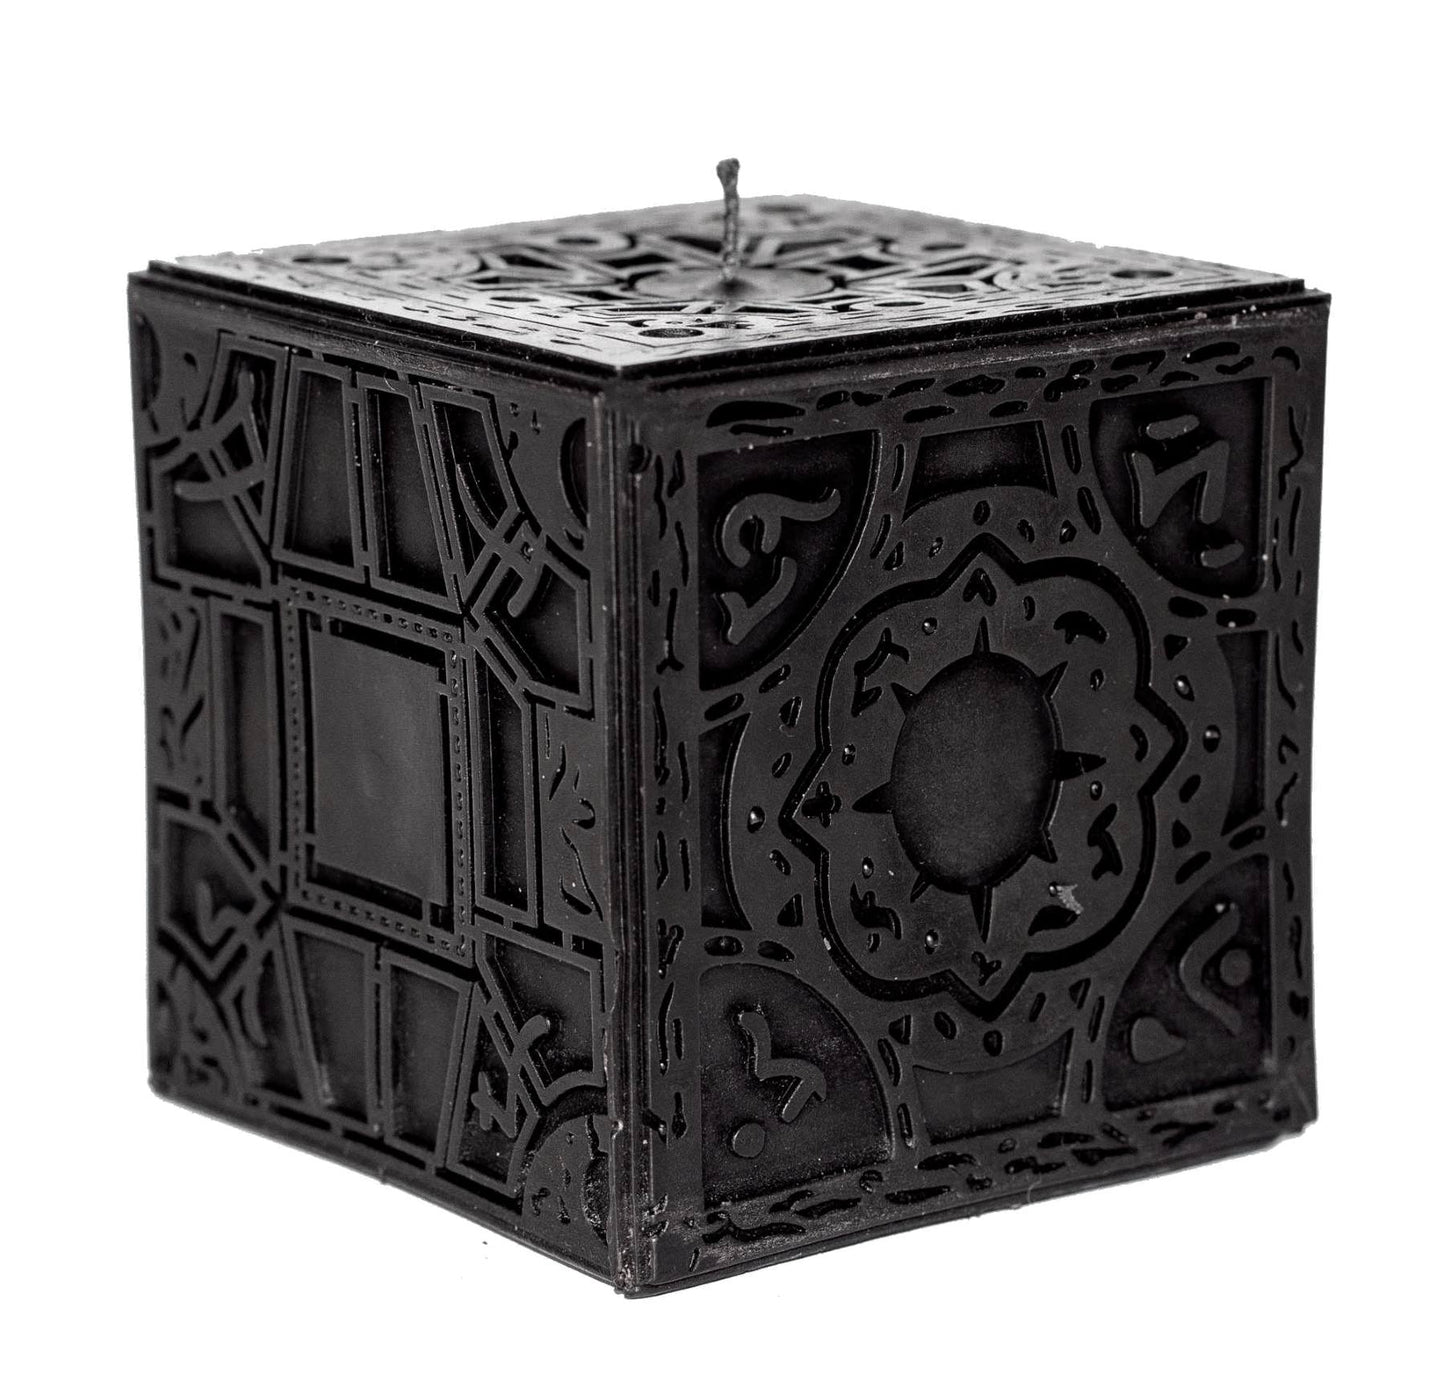 The Cube Candle